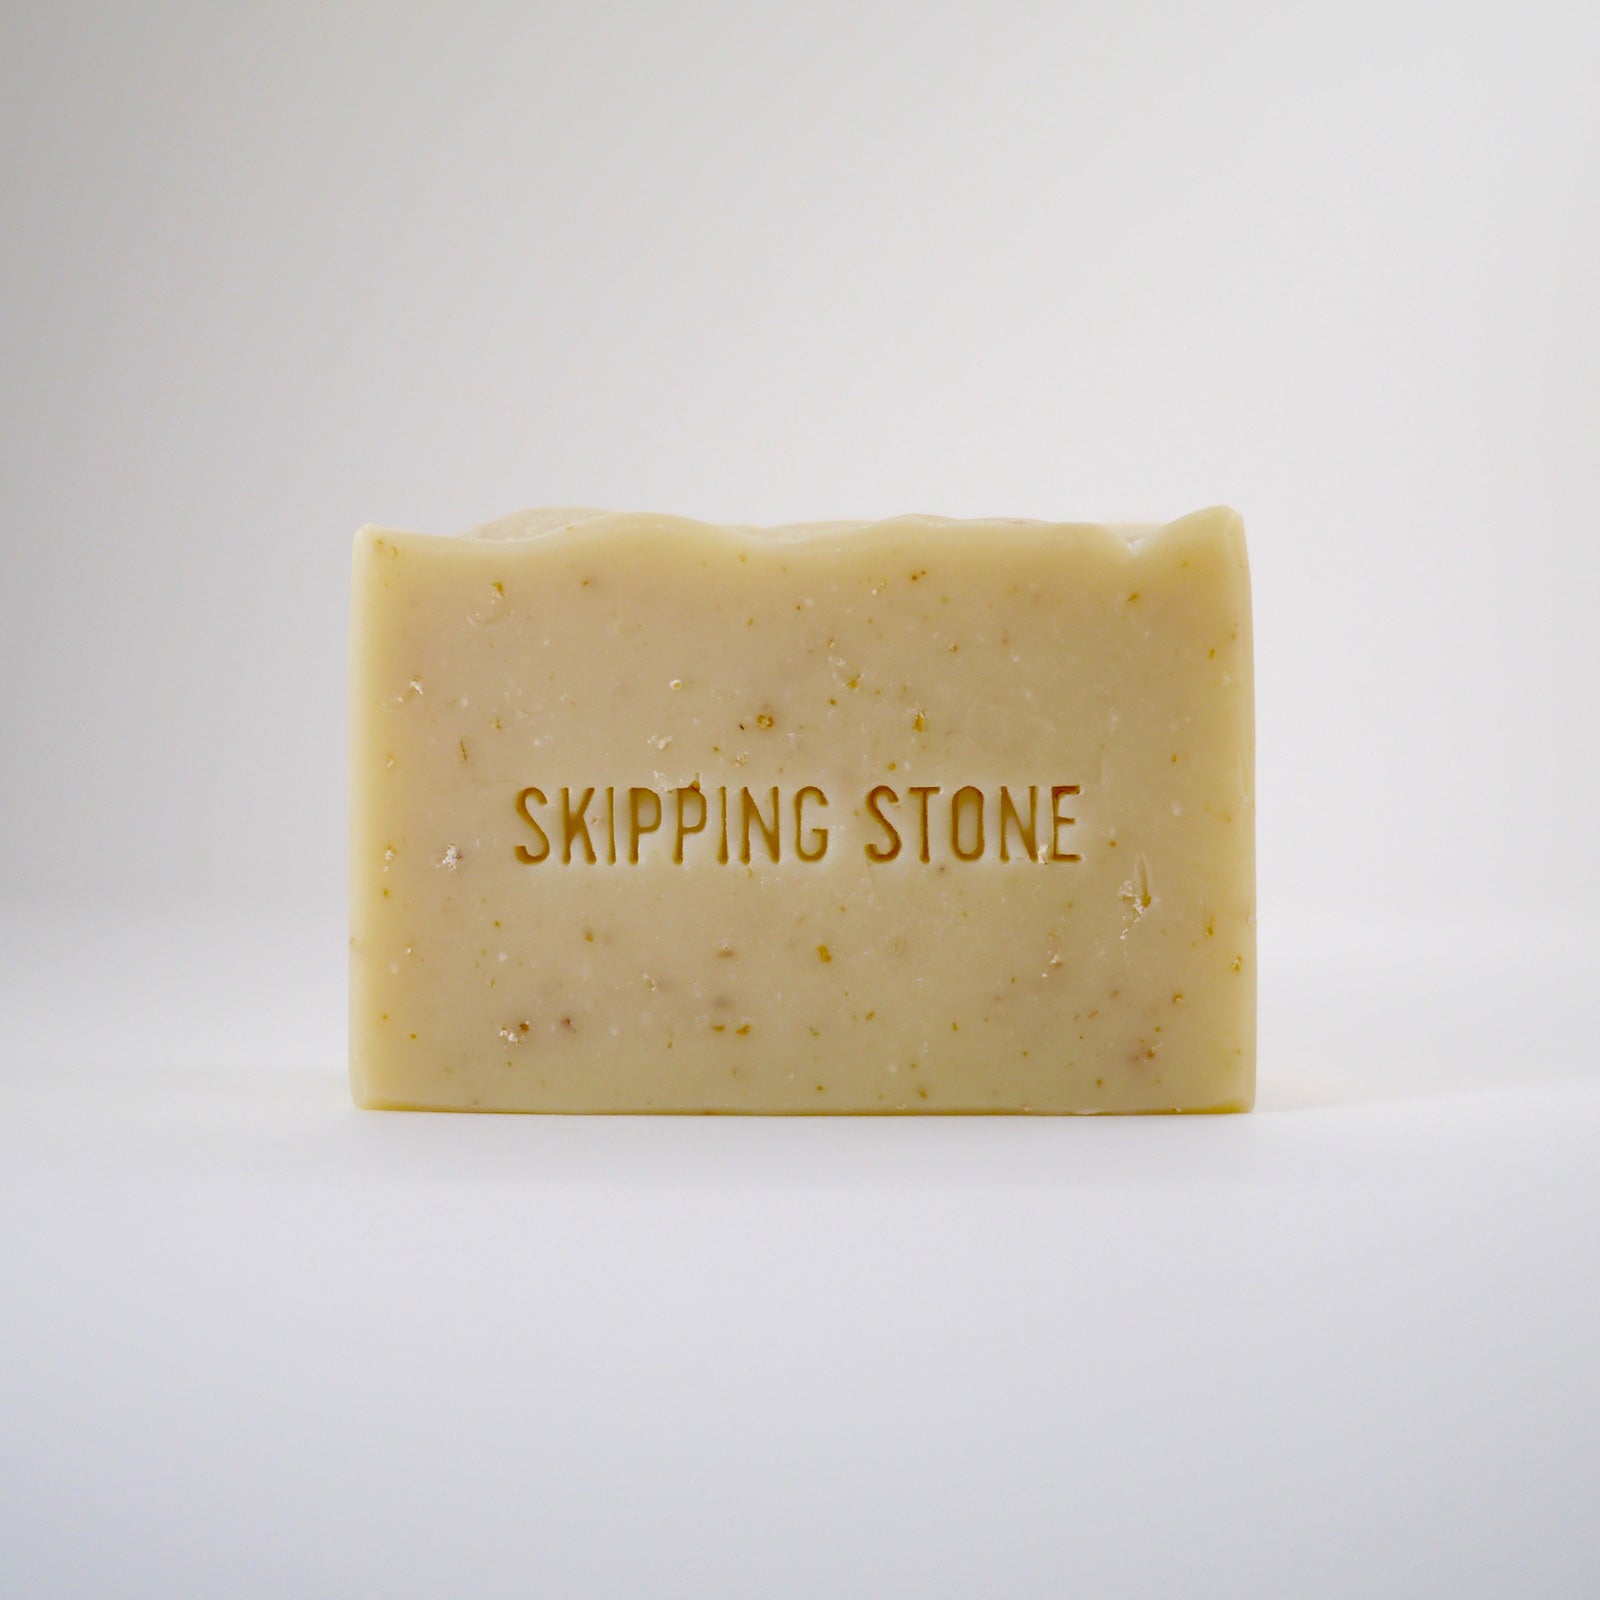 Skipping Stone Soap Pure. Oatmeal + Honey Body + Face Soap – unscented